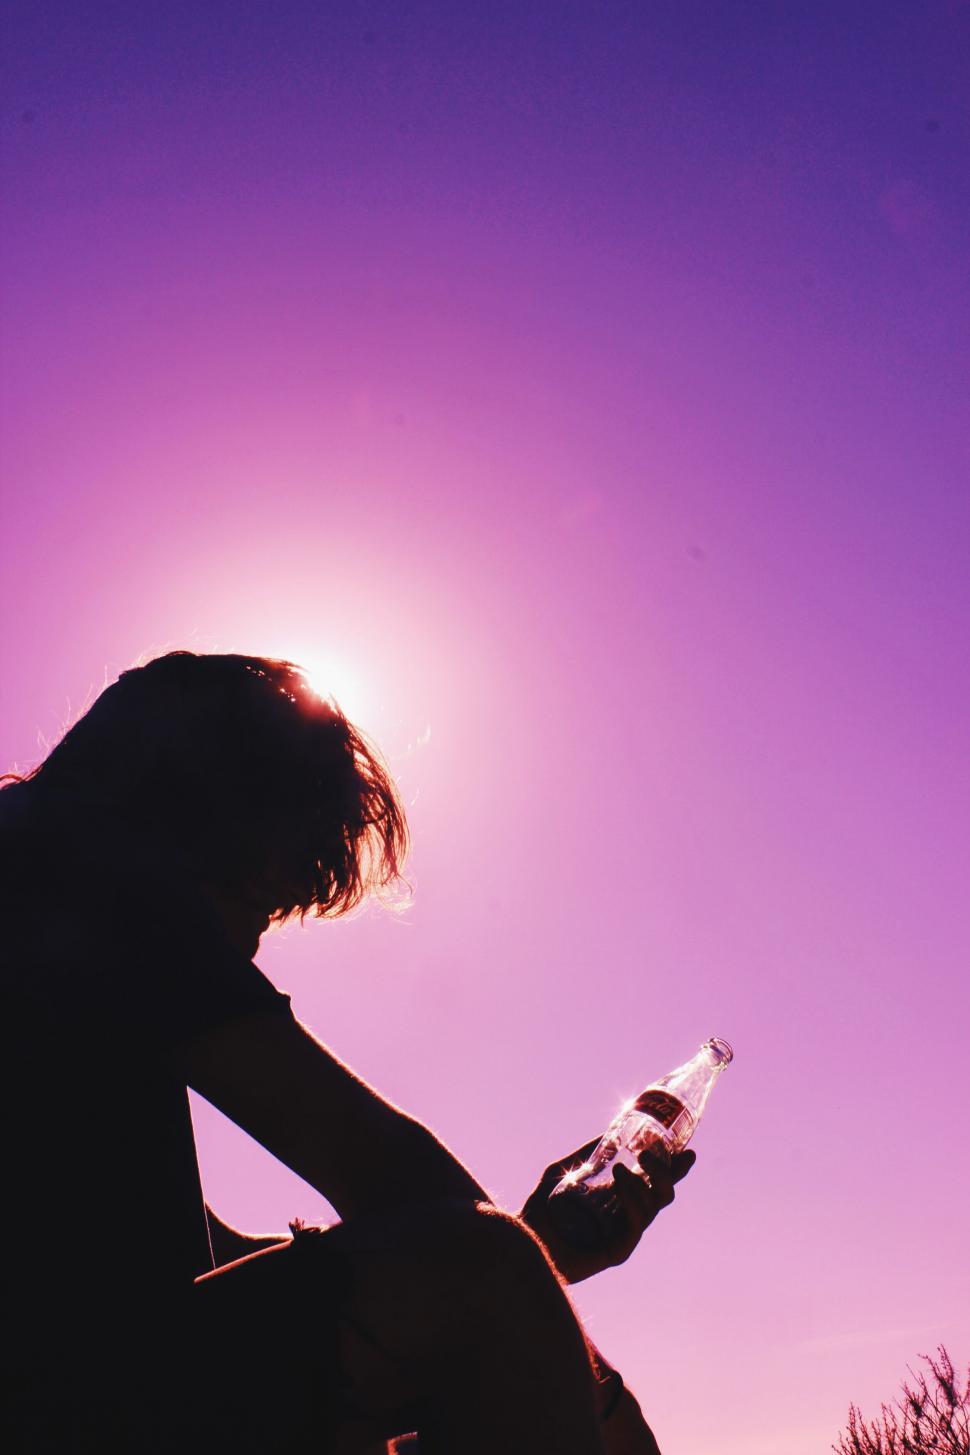 Free Image of Silhouette of person with a bottle against sun 